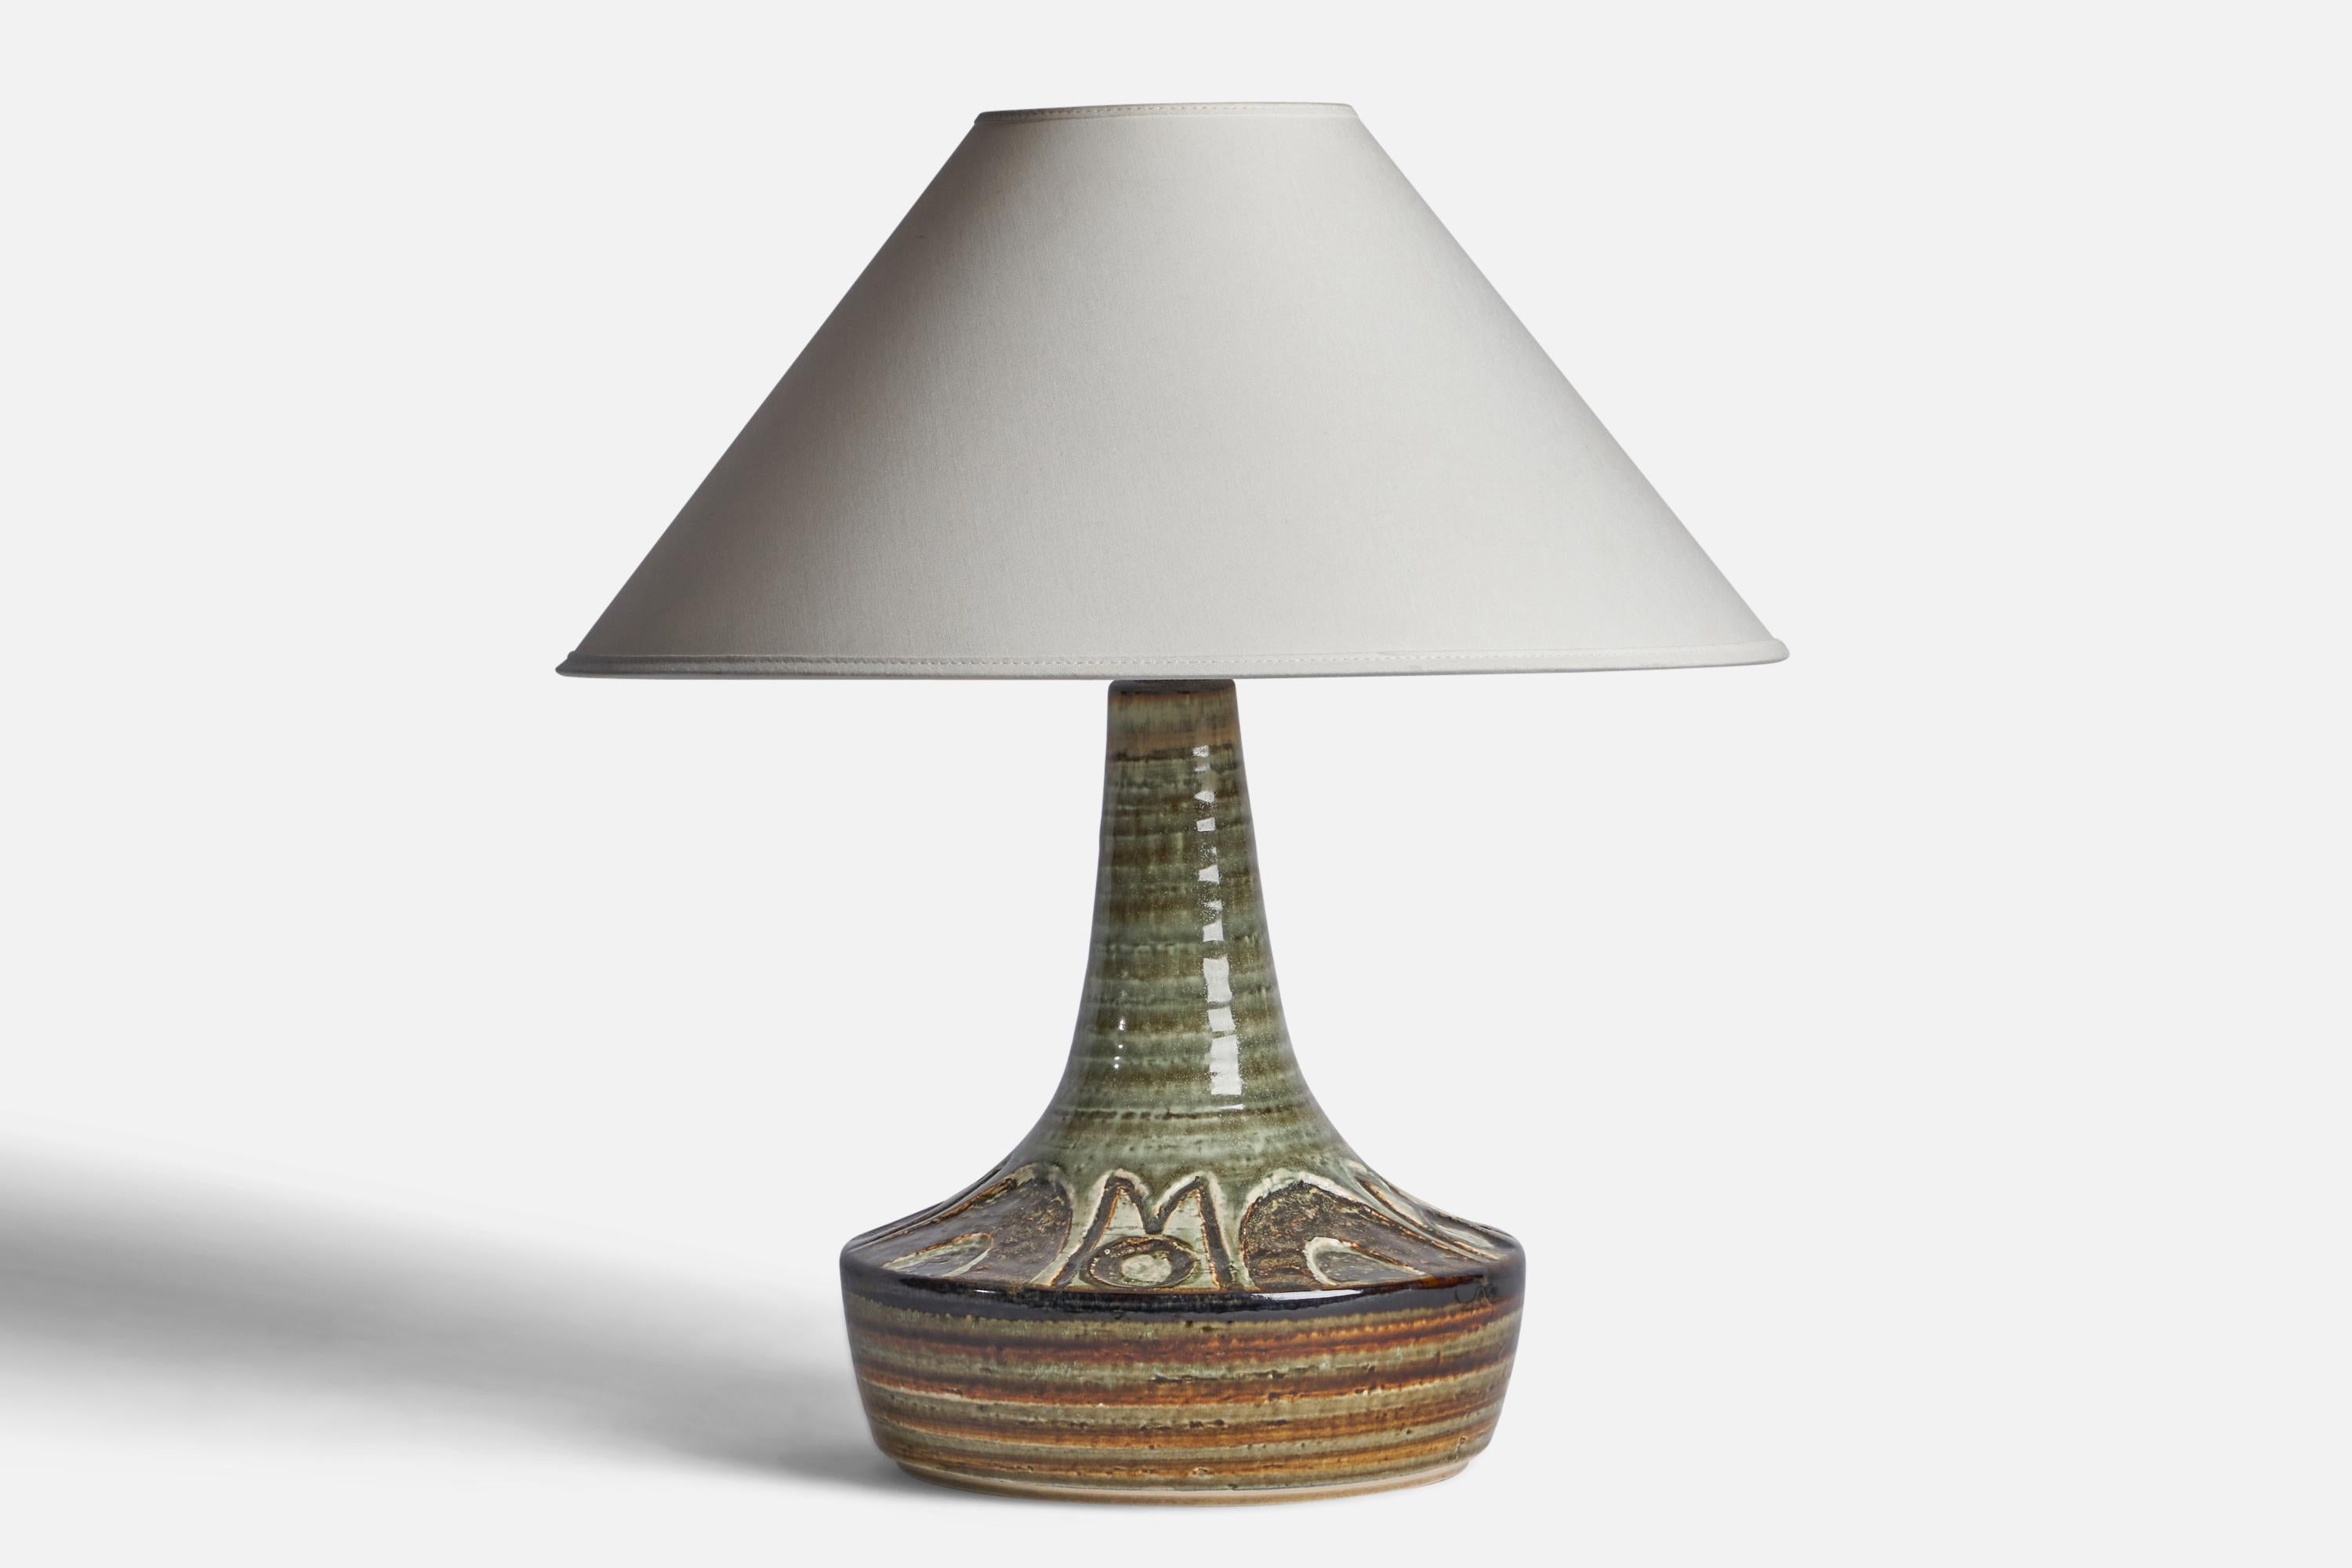 A green-glazed stoneware table lamp designed and produced by 
Søholm, Bornholm, Denmark, 1960s.

Dimensions of Lamp (inches): 13.35” H x 8.9” Diameter
Dimensions of Shade (inches): 4.5” Top Diameter x 16” Bottom Diameter x 7.15” H 
Dimensions of